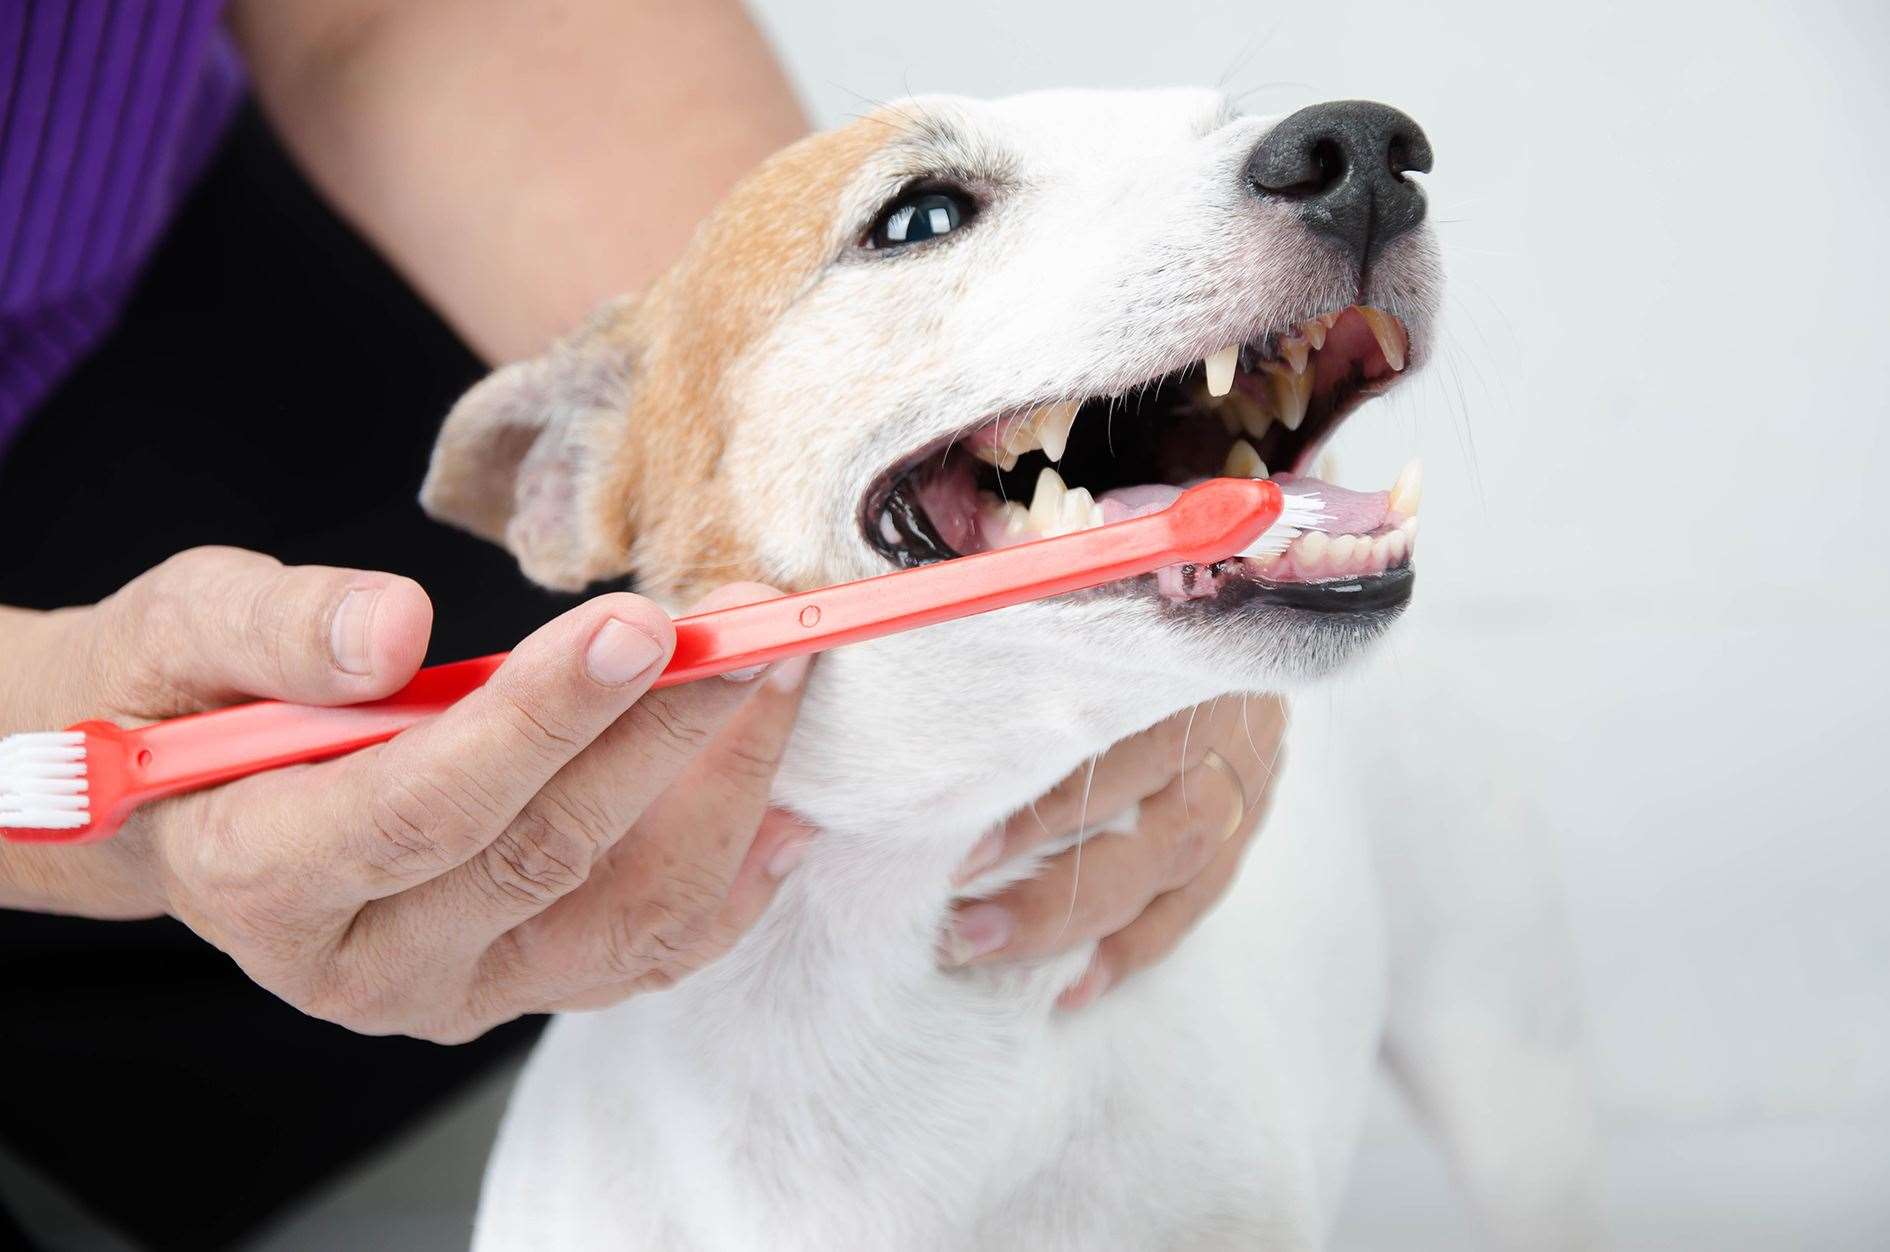 Dental care is as important for dogs as it is for their owners.